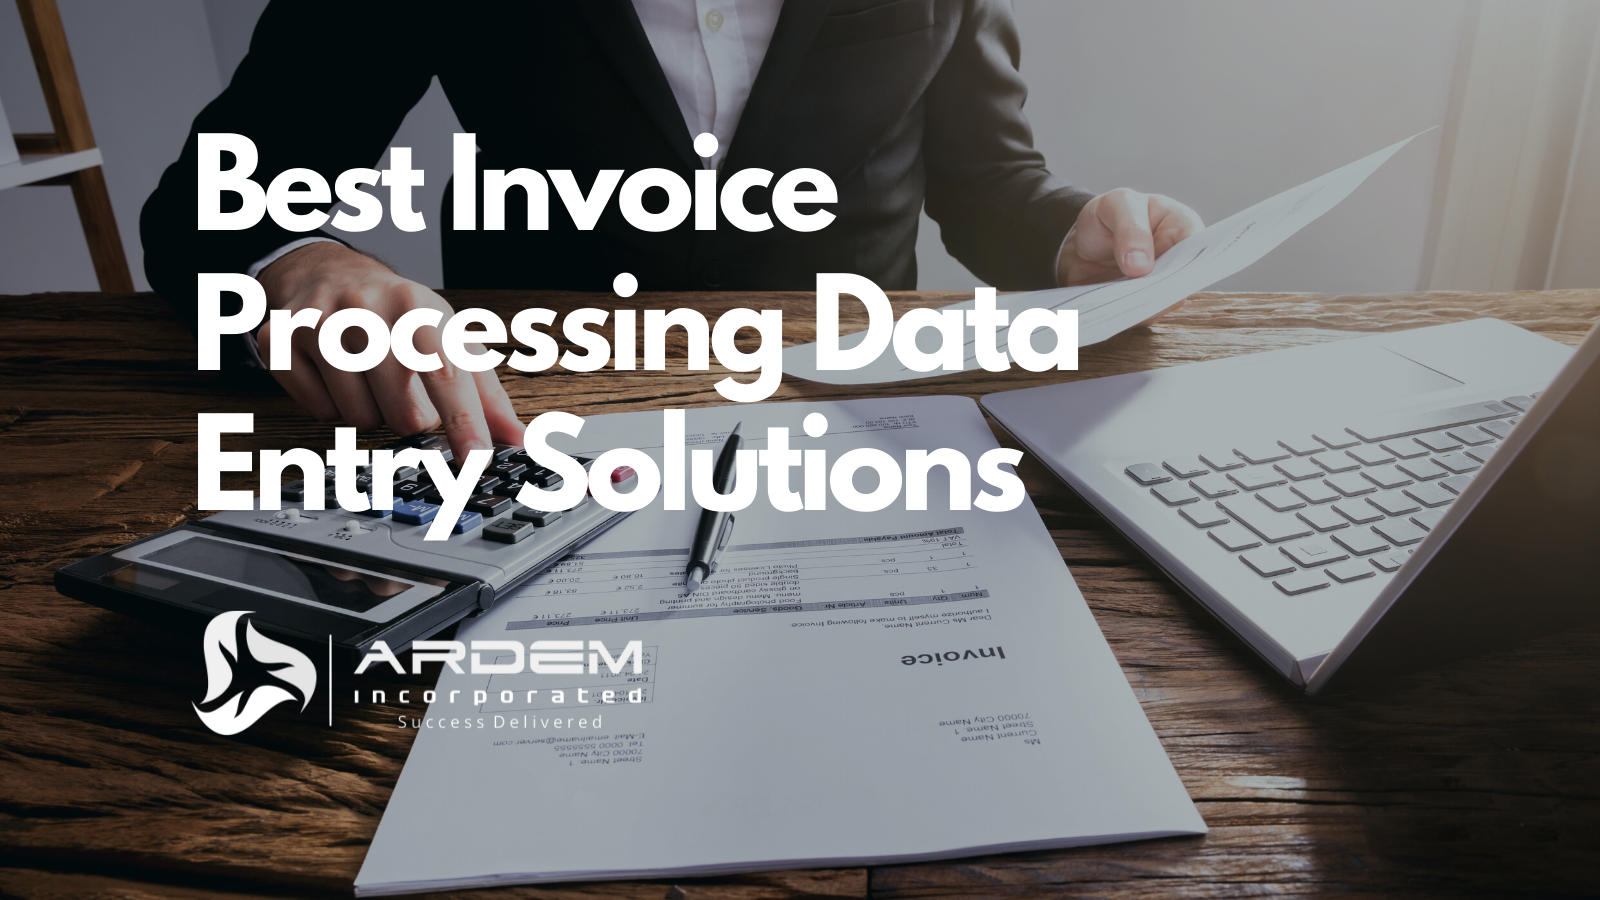 Best Invoice Processing Data Entry Solutions